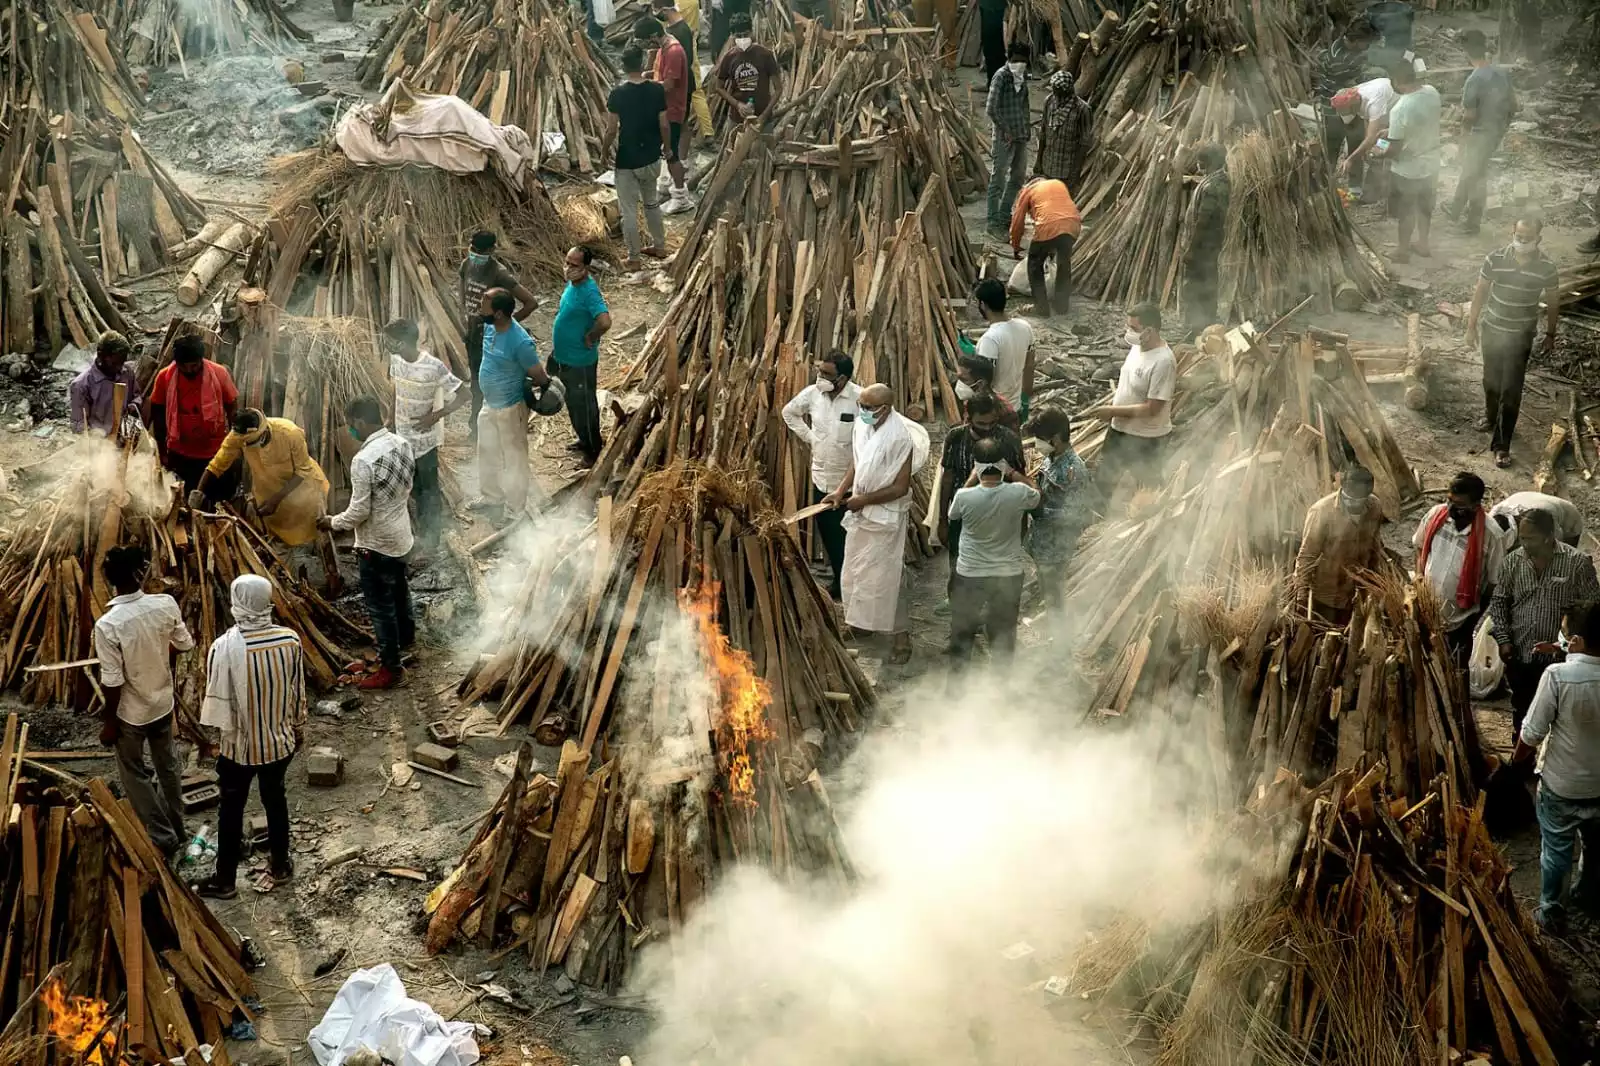 BURNING PYRES IN INDIA, DURING THE PLAGUE